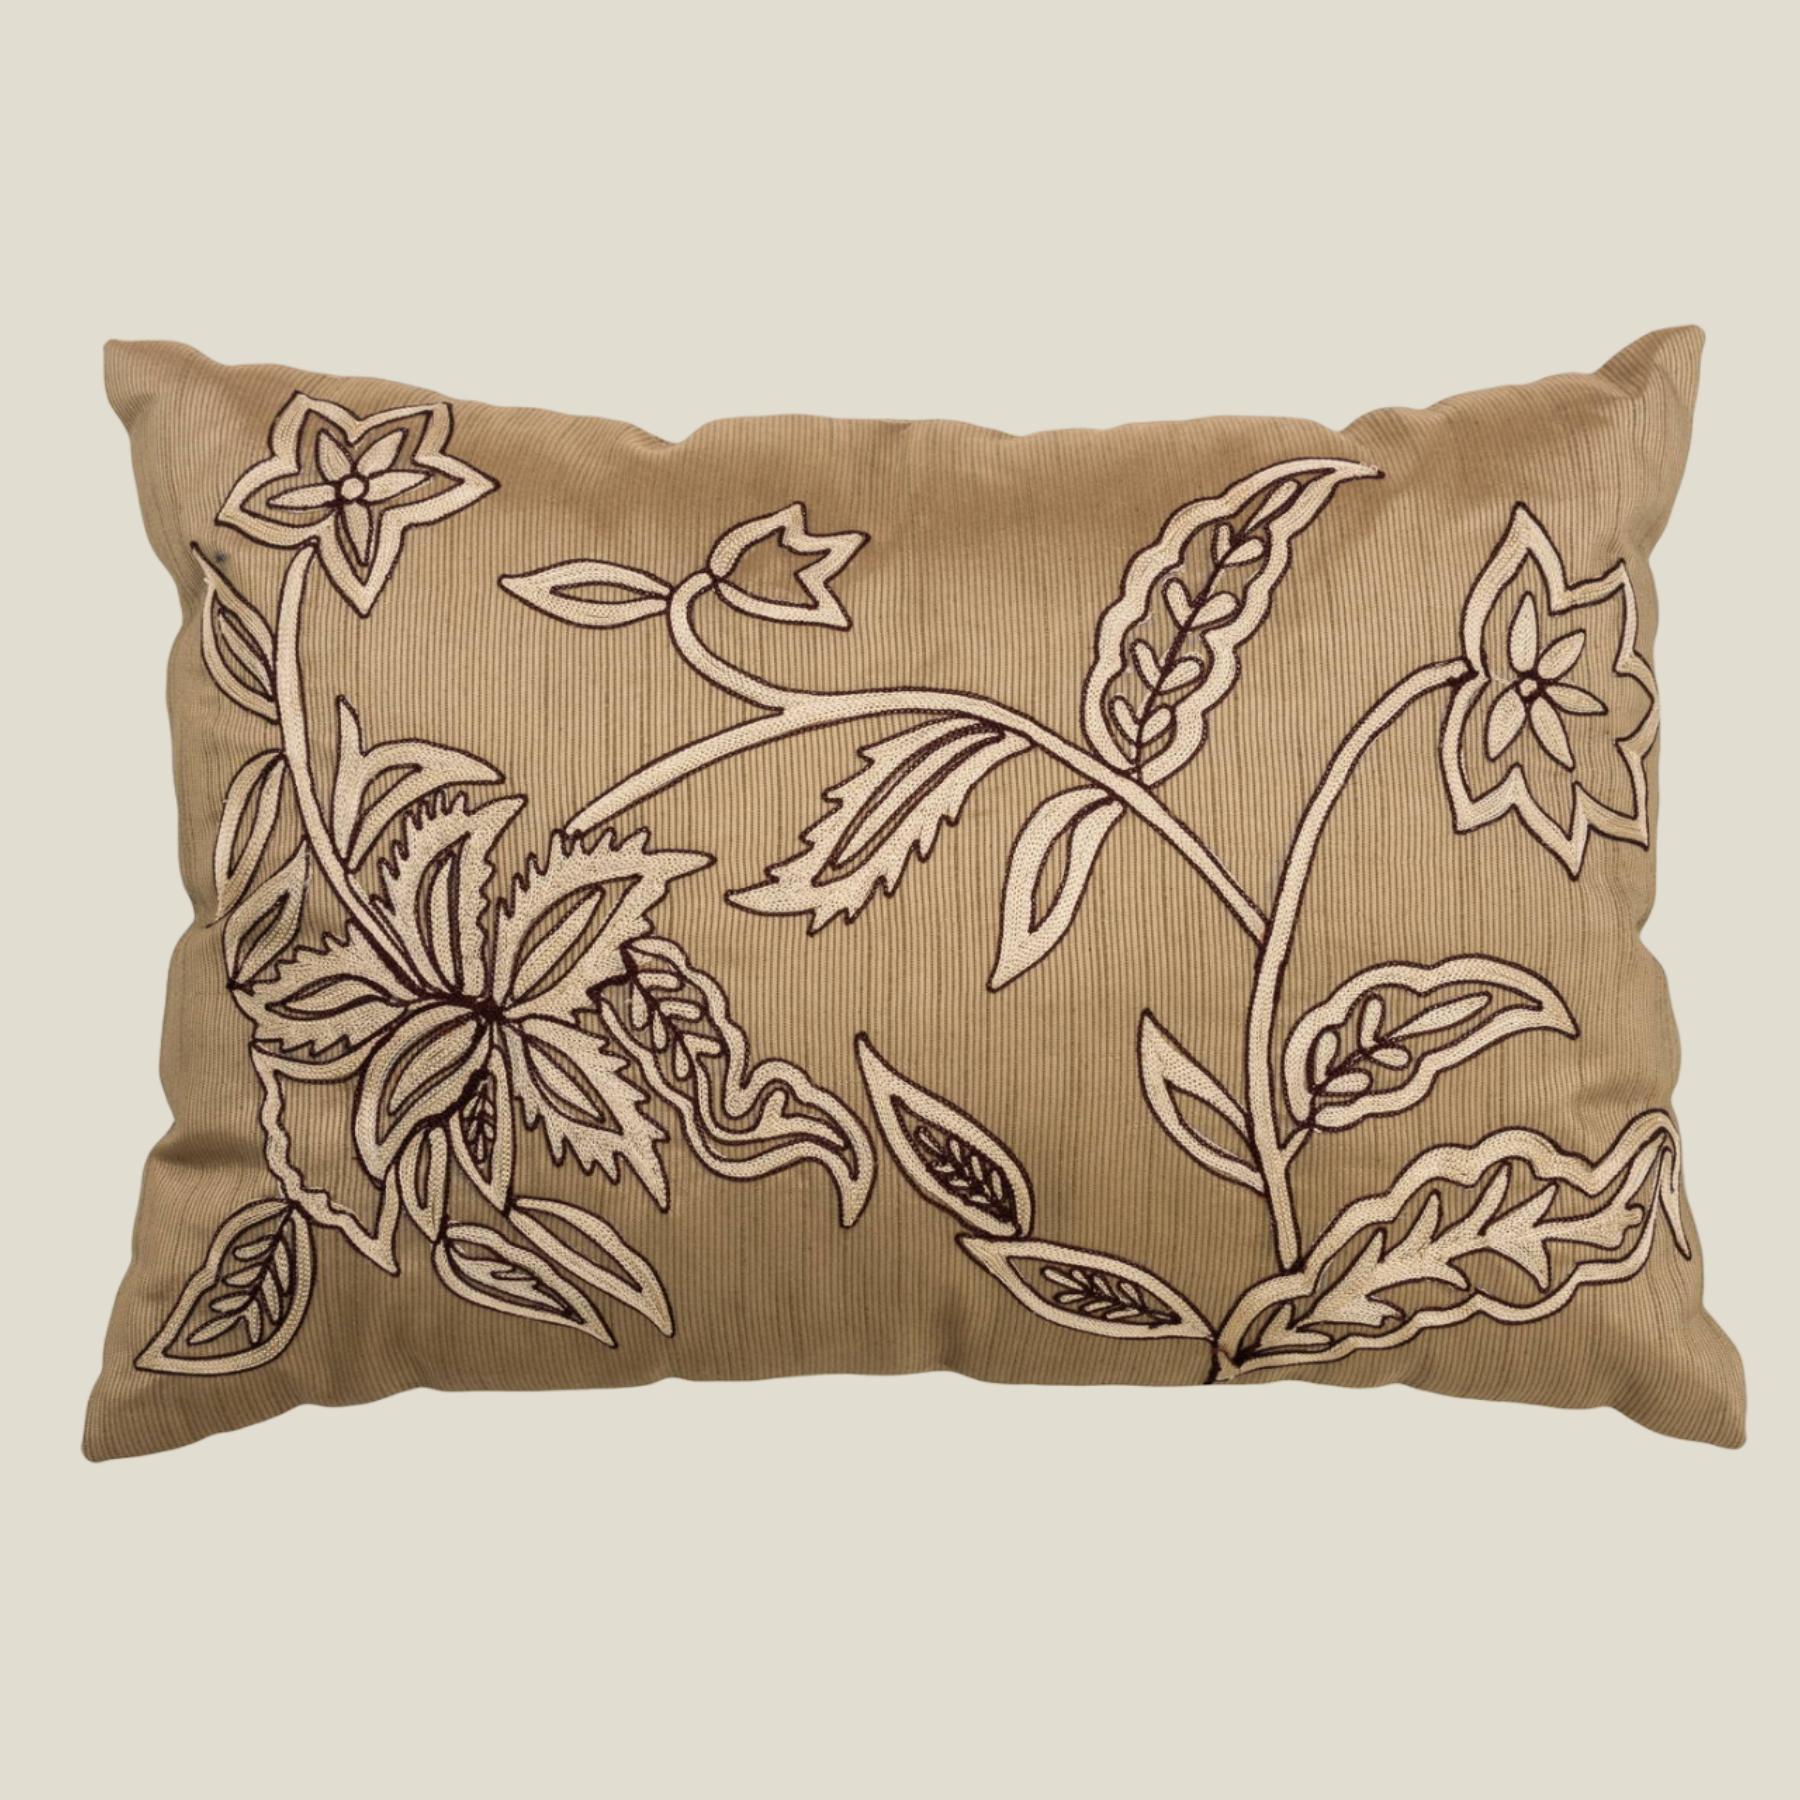 The Luxelife Dark Beige Dupion Floral Embroidered Cushion Cover